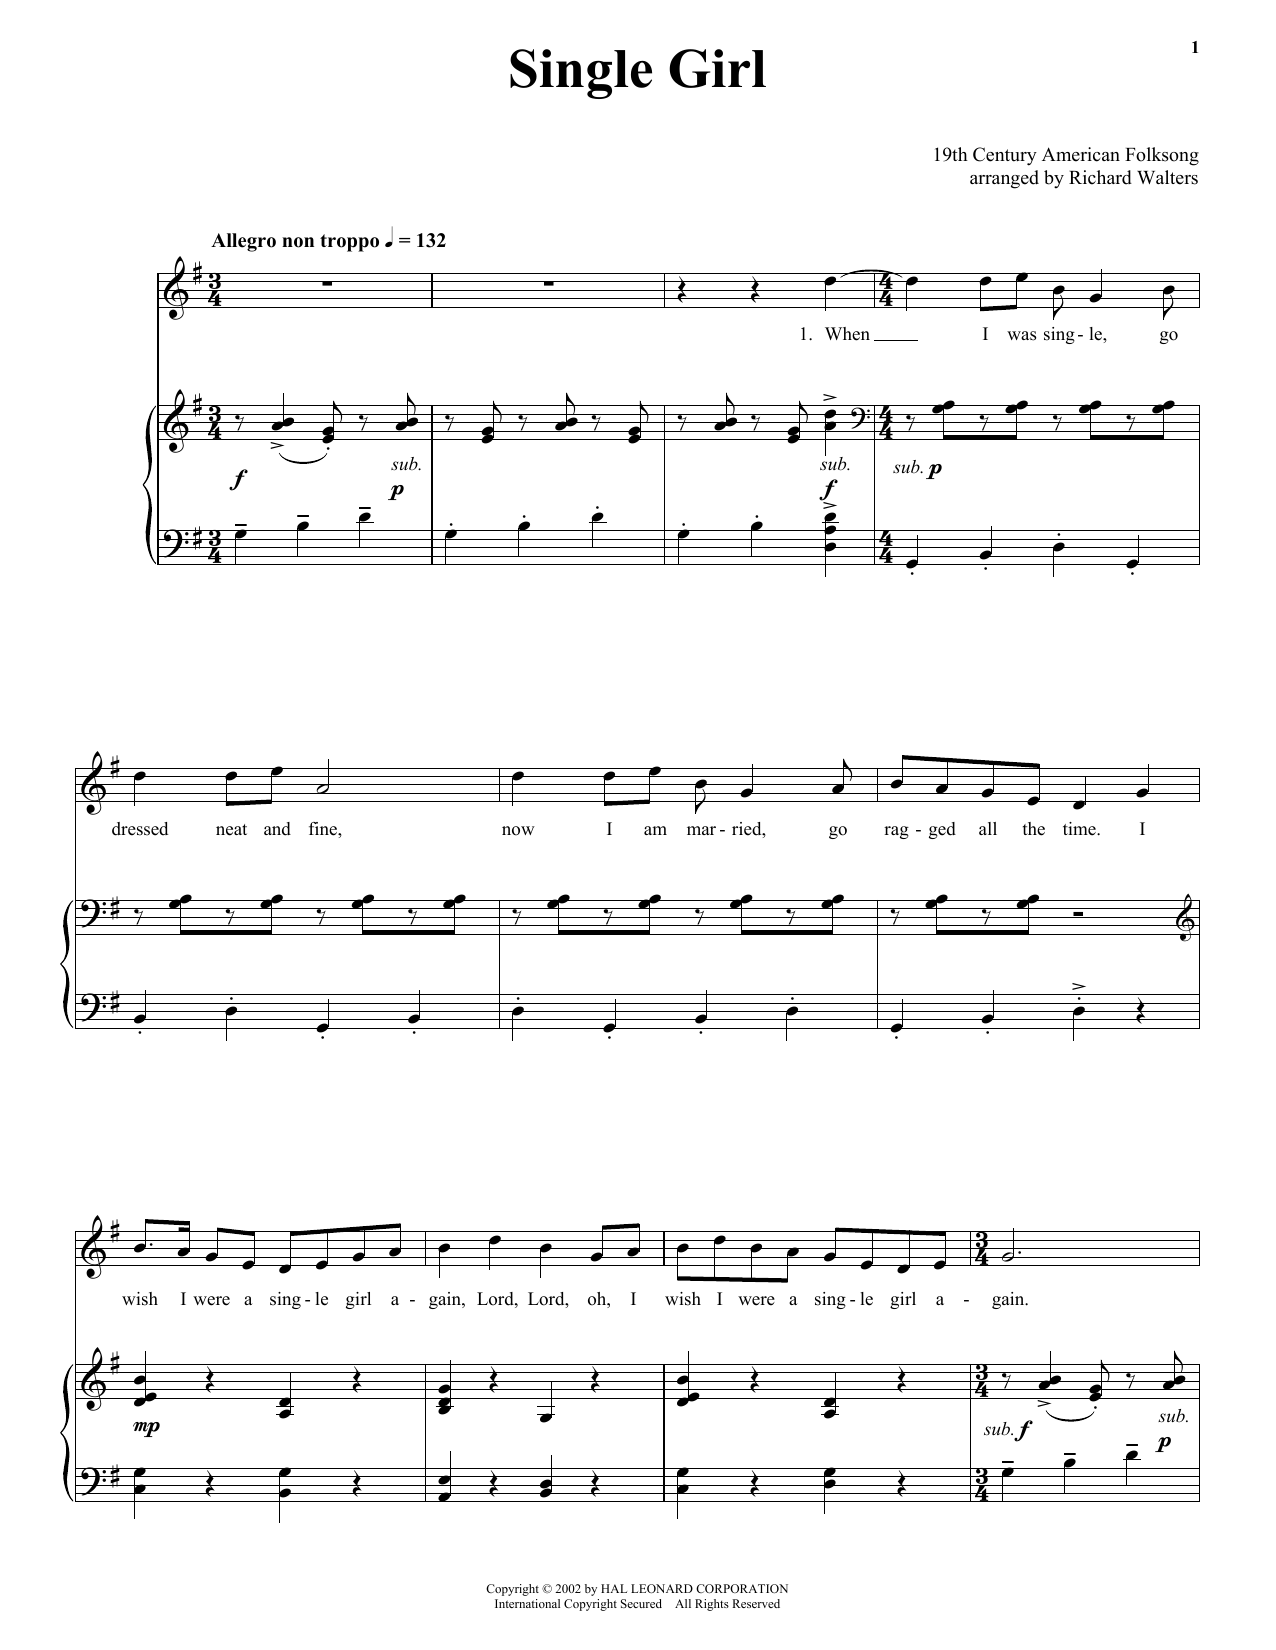 Download 19th Century American Folksong Single Girl Sheet Music